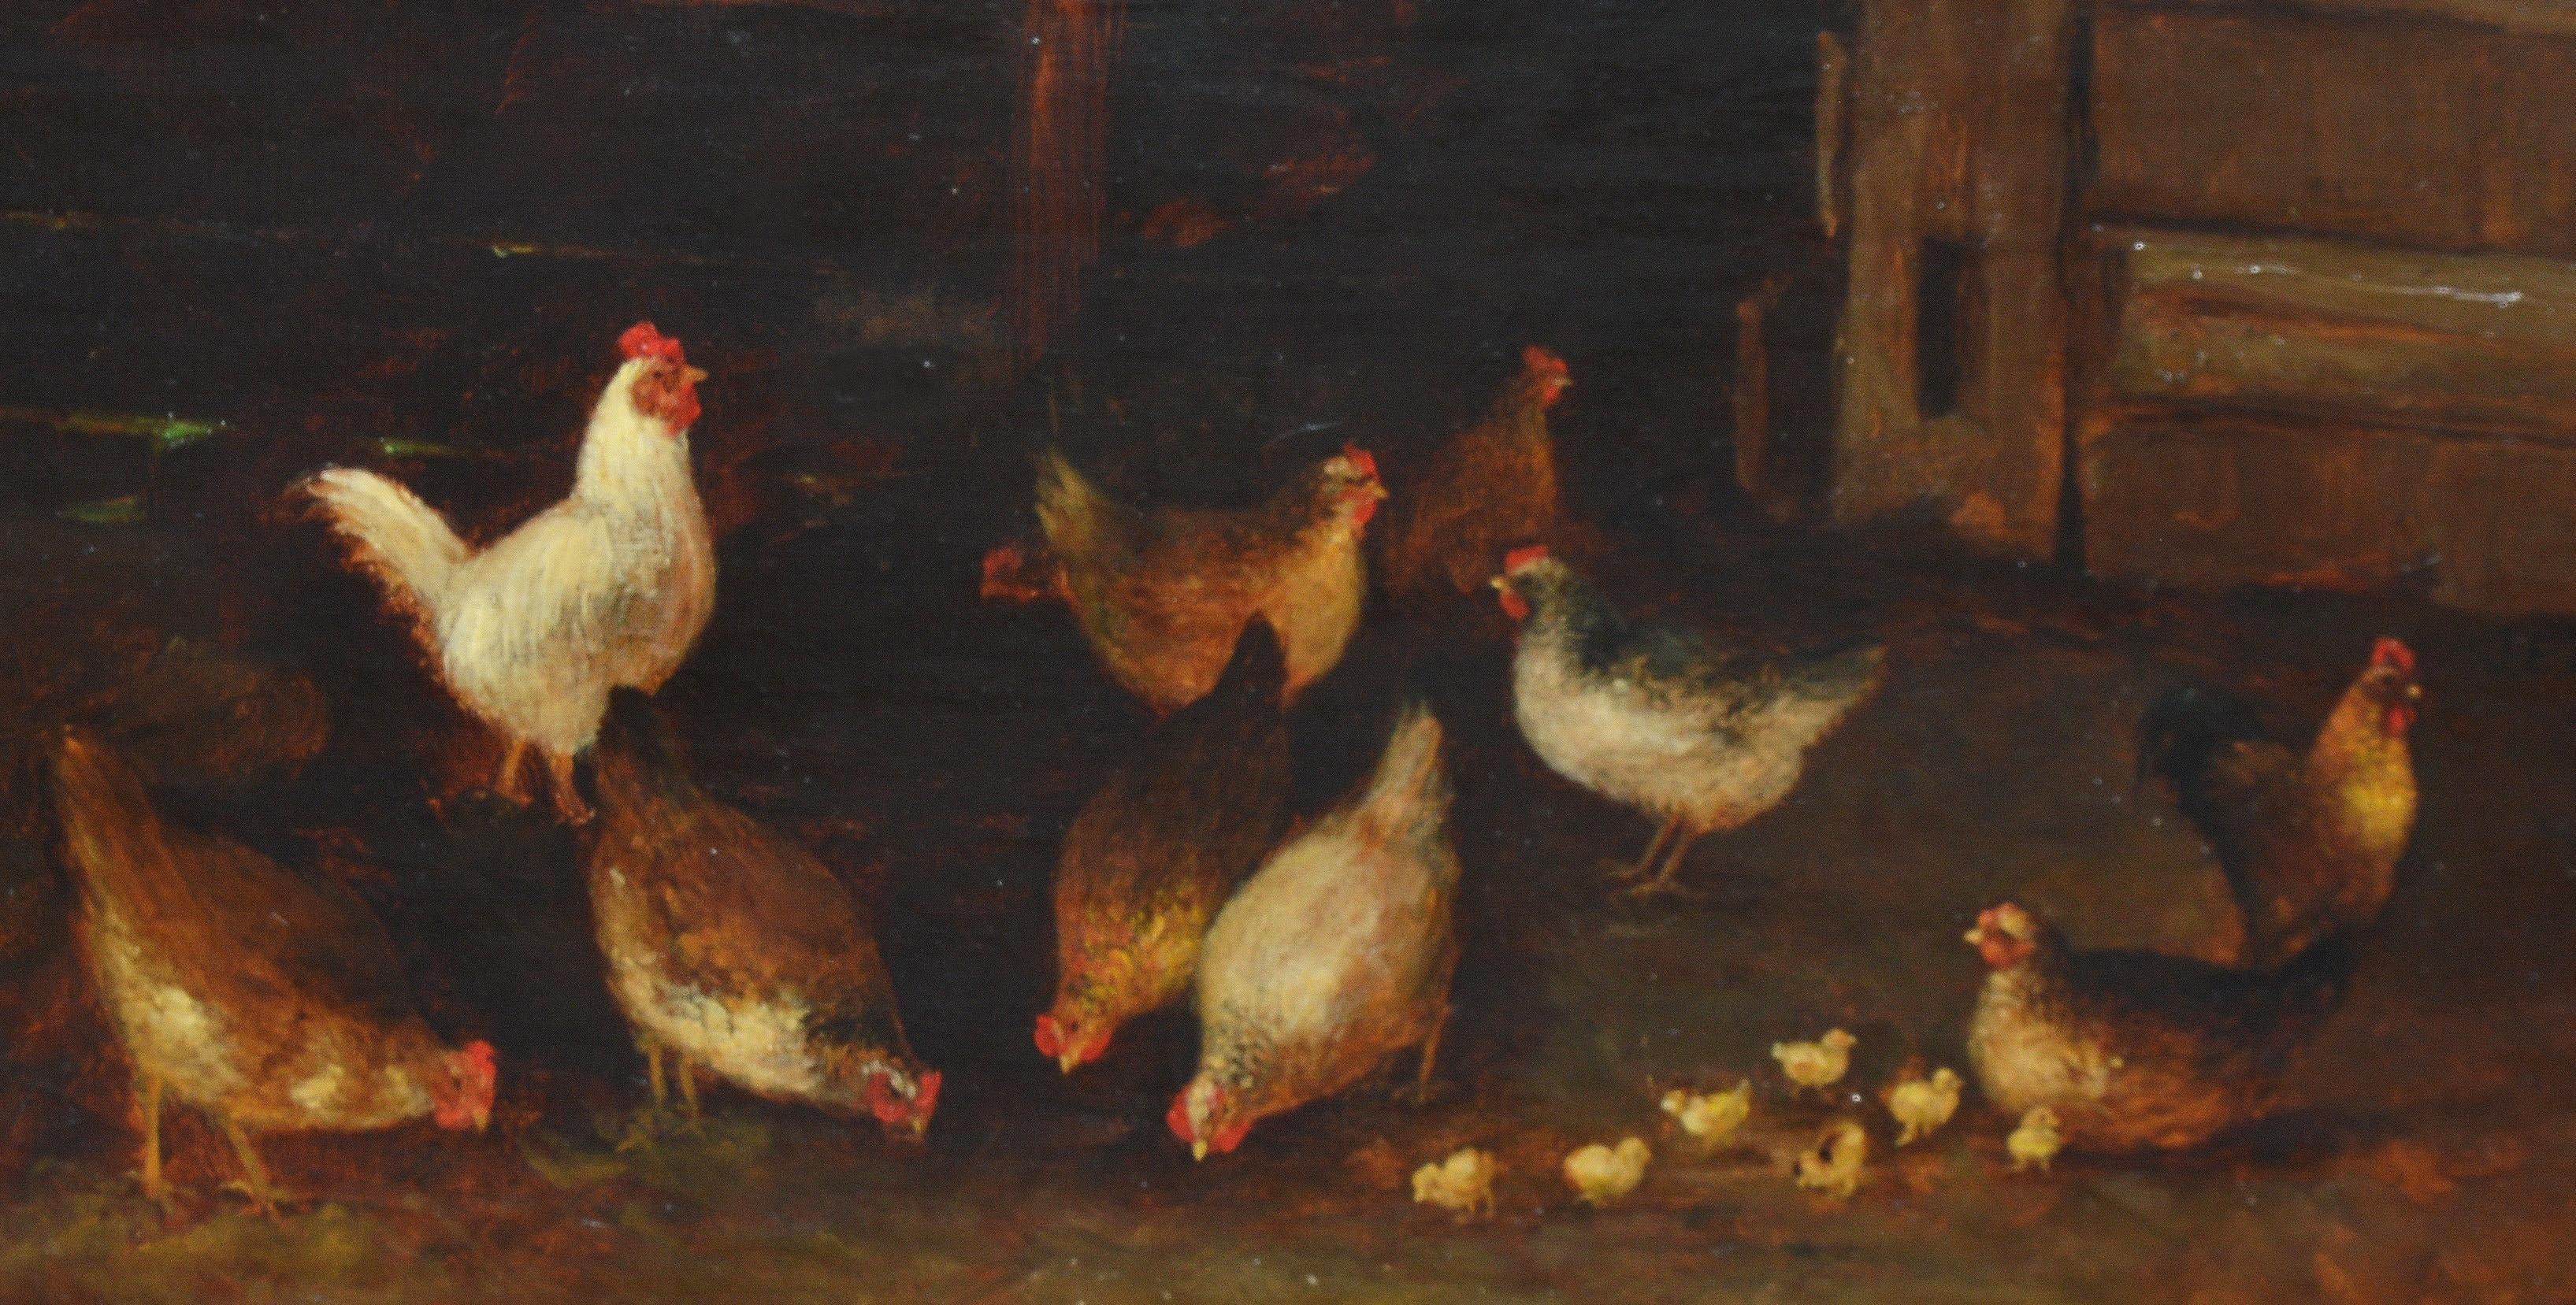 Antique folk art barnyard painting by Josephine Bradstreet  (1859 - 1920).  Oil on canvas, circa 1880.  Signed.  Displayed in a period giltwood frame.  Image, 18